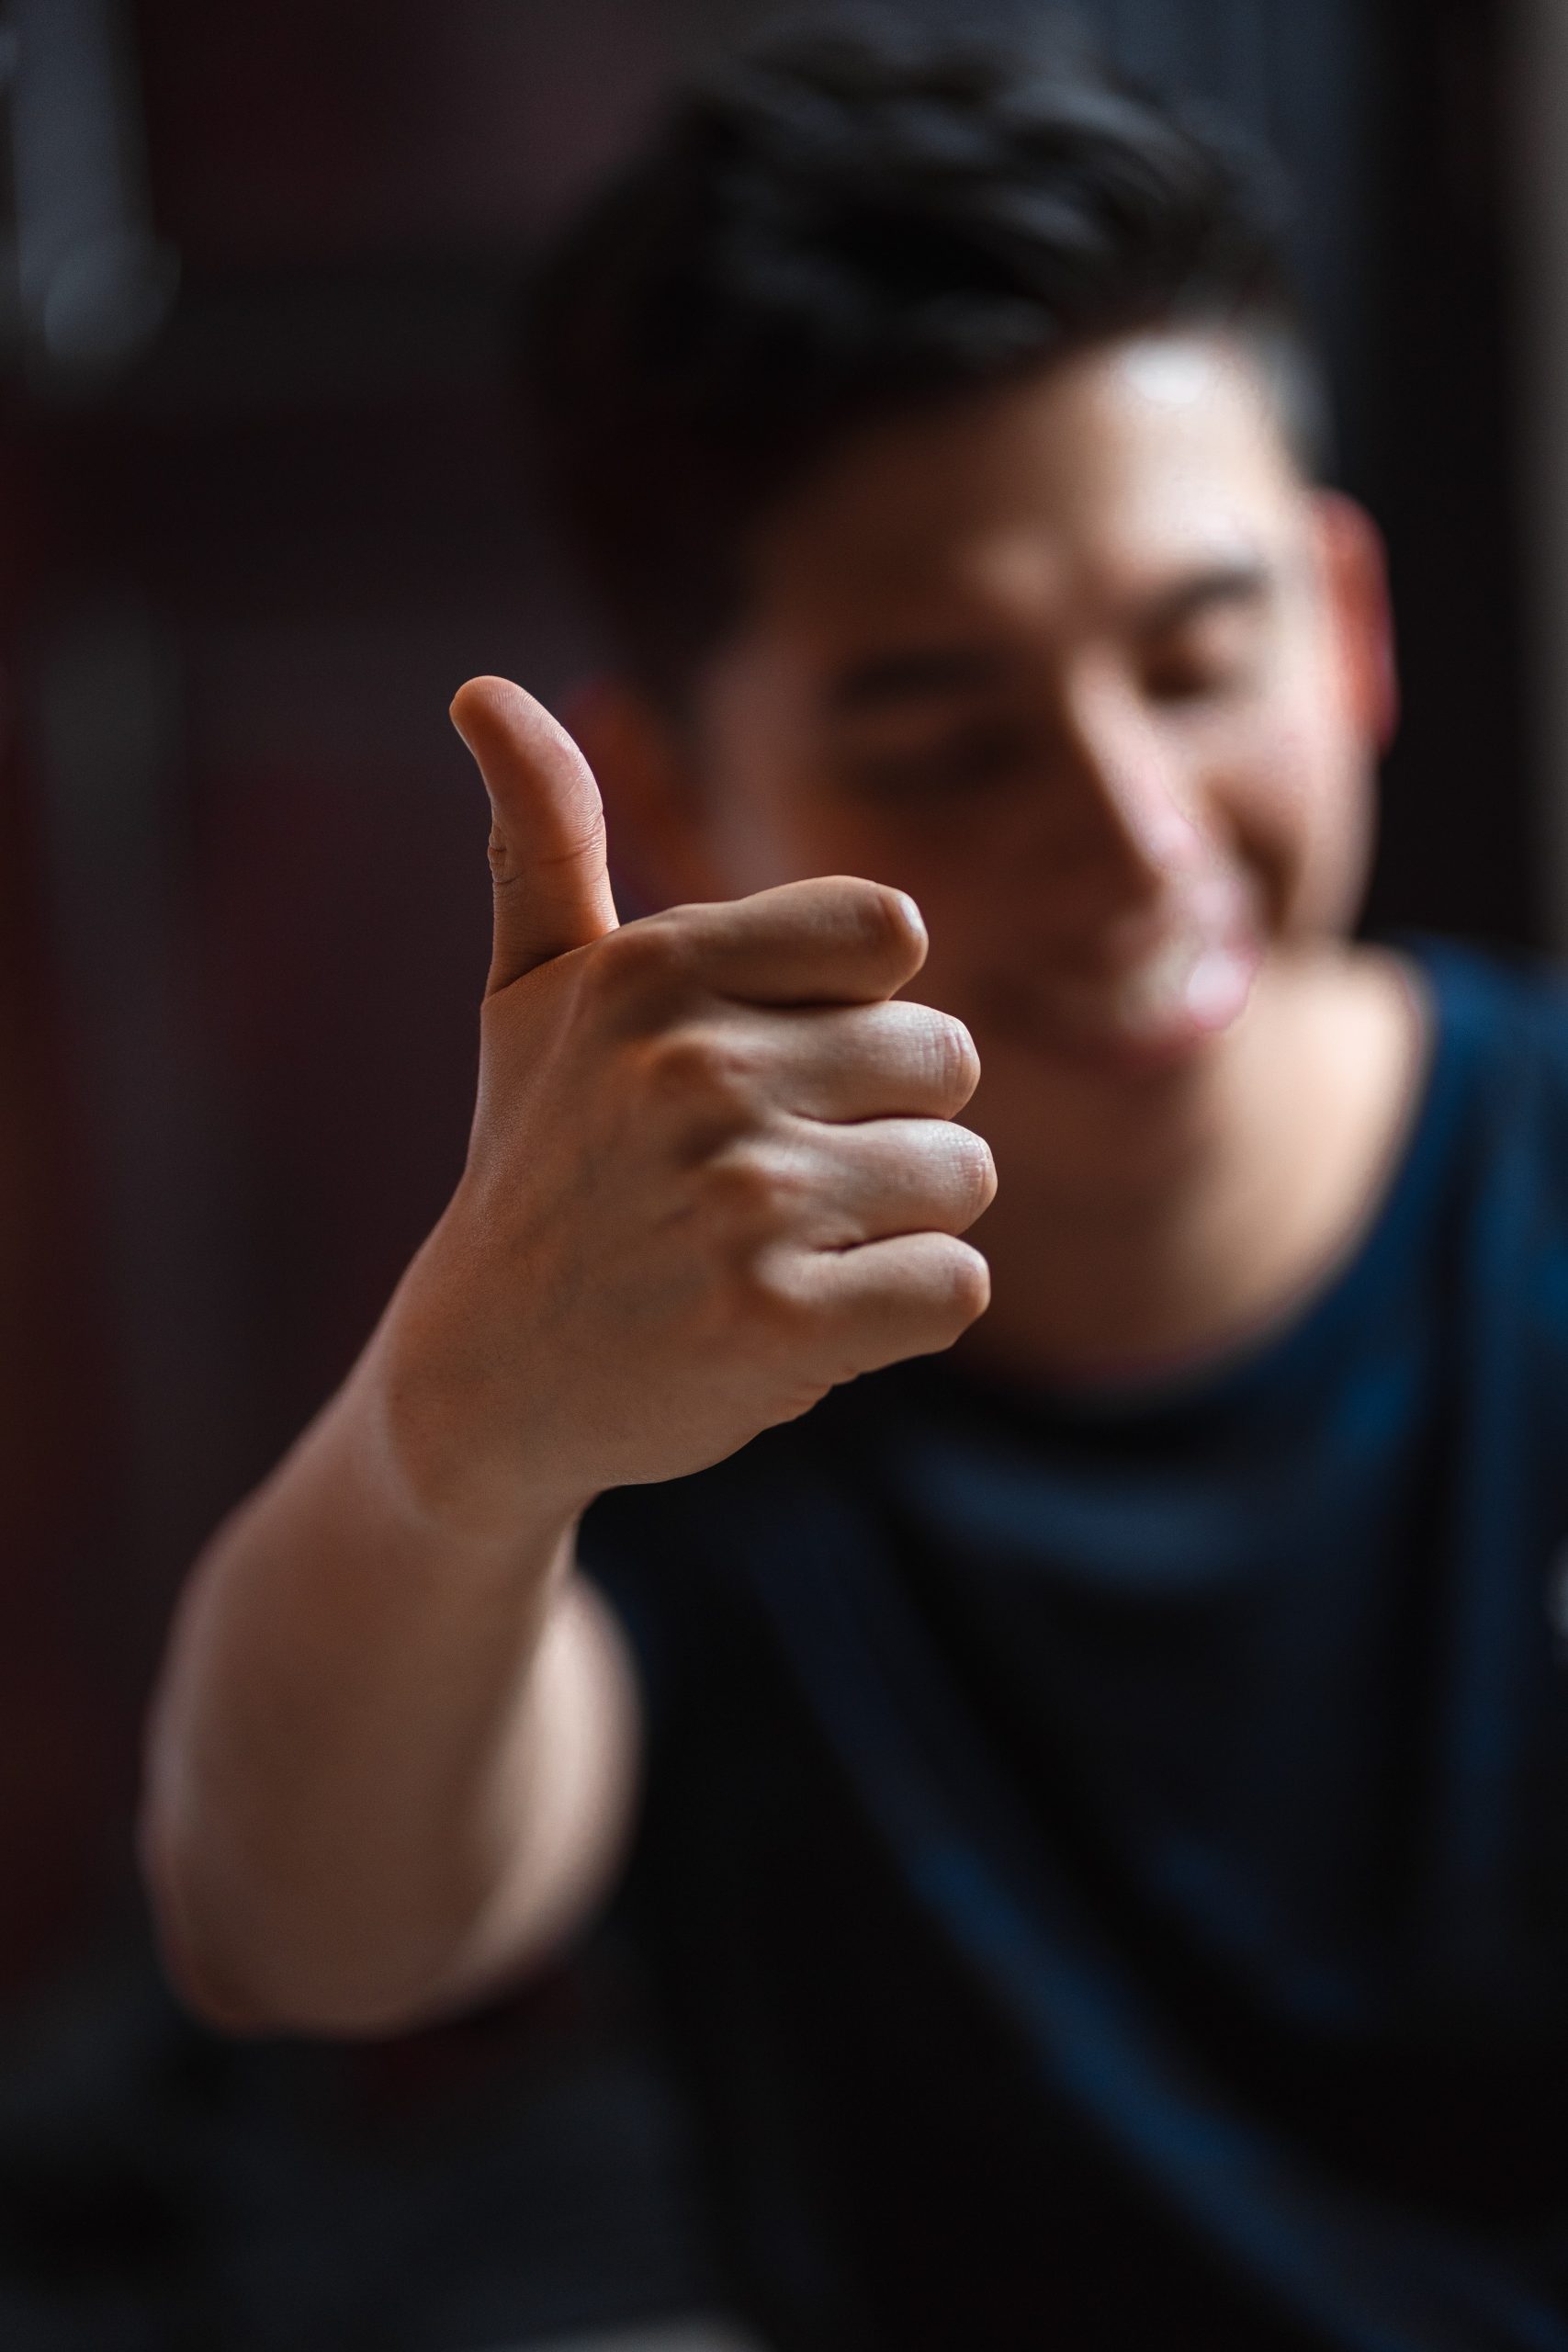 Photograph of a man holding a thumbs up gesture. Only his hand is in focus.